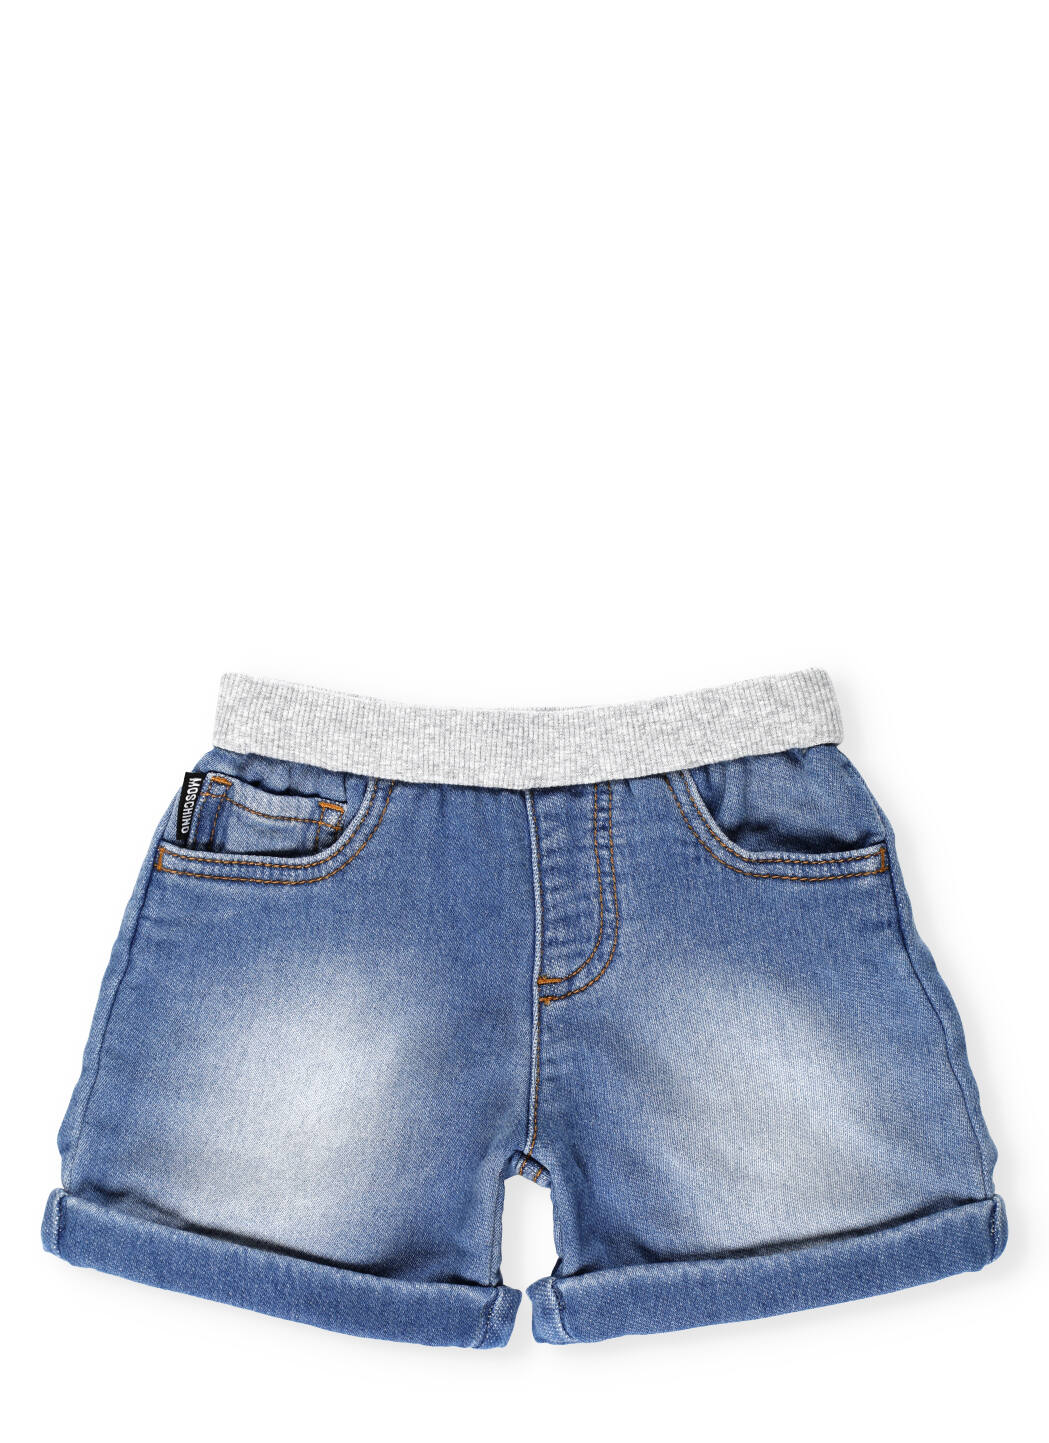 Moschino Cotton Jeans Short